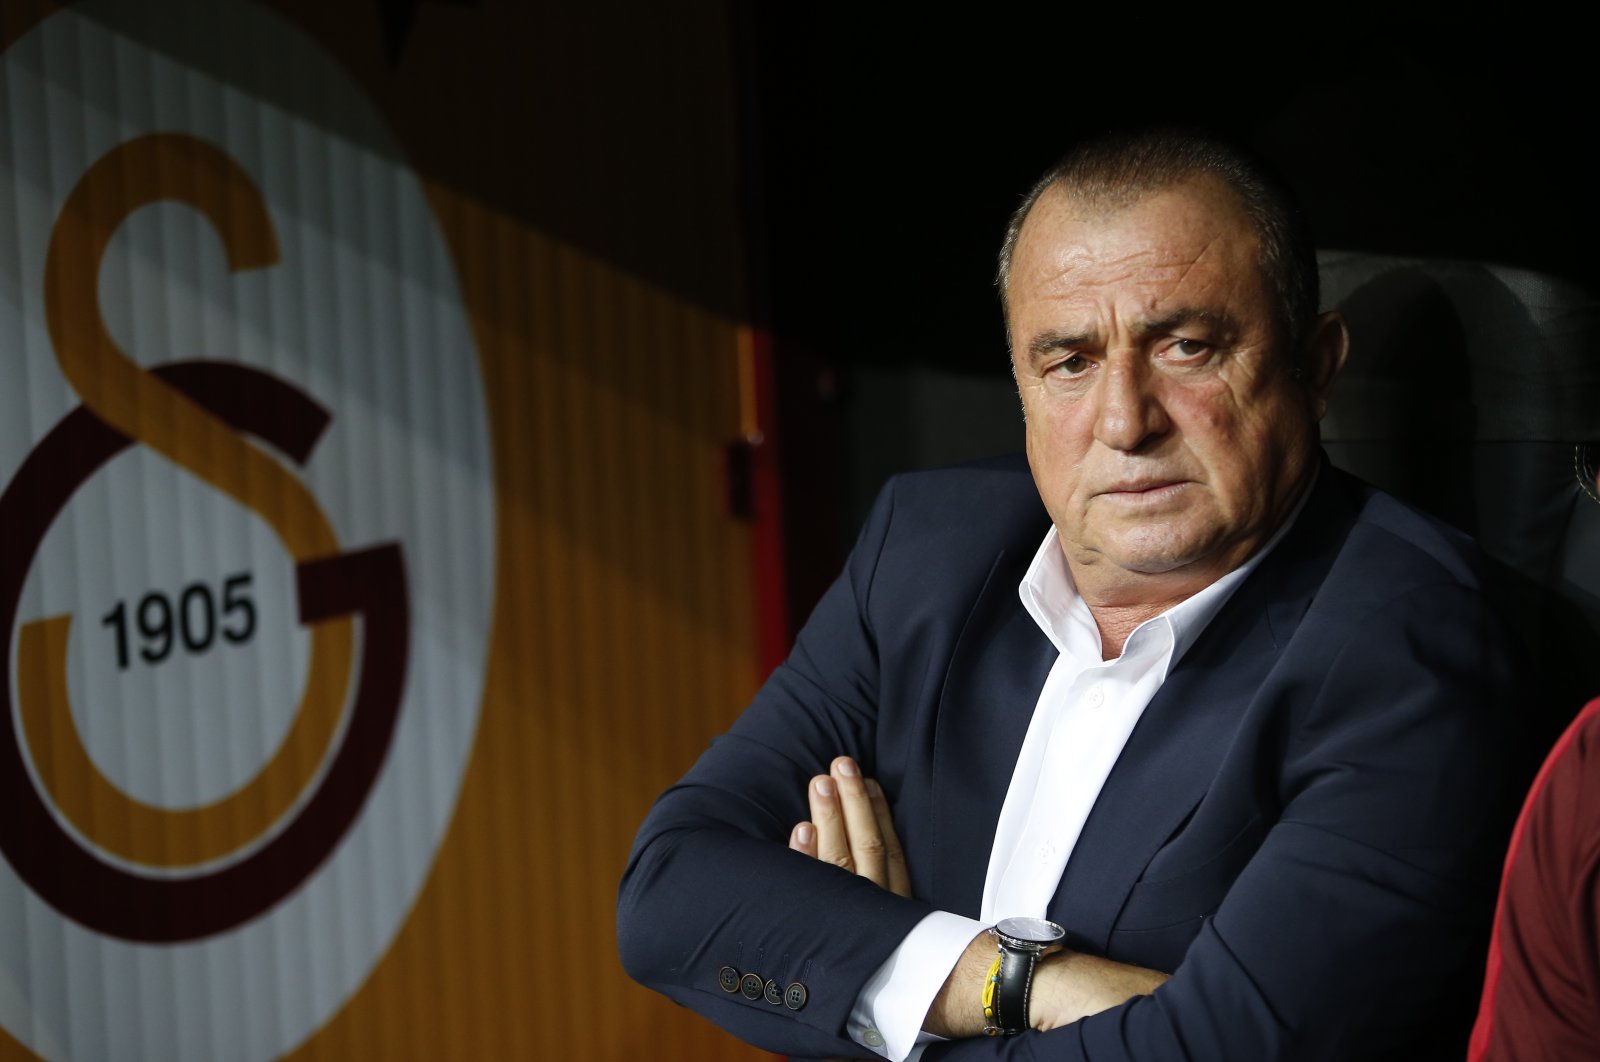 Fatih Terim, sits on the bench prior to a Champions League Group A soccer match in Istanbul, Turkey, Oct. 1, 2019. (AP Photo)